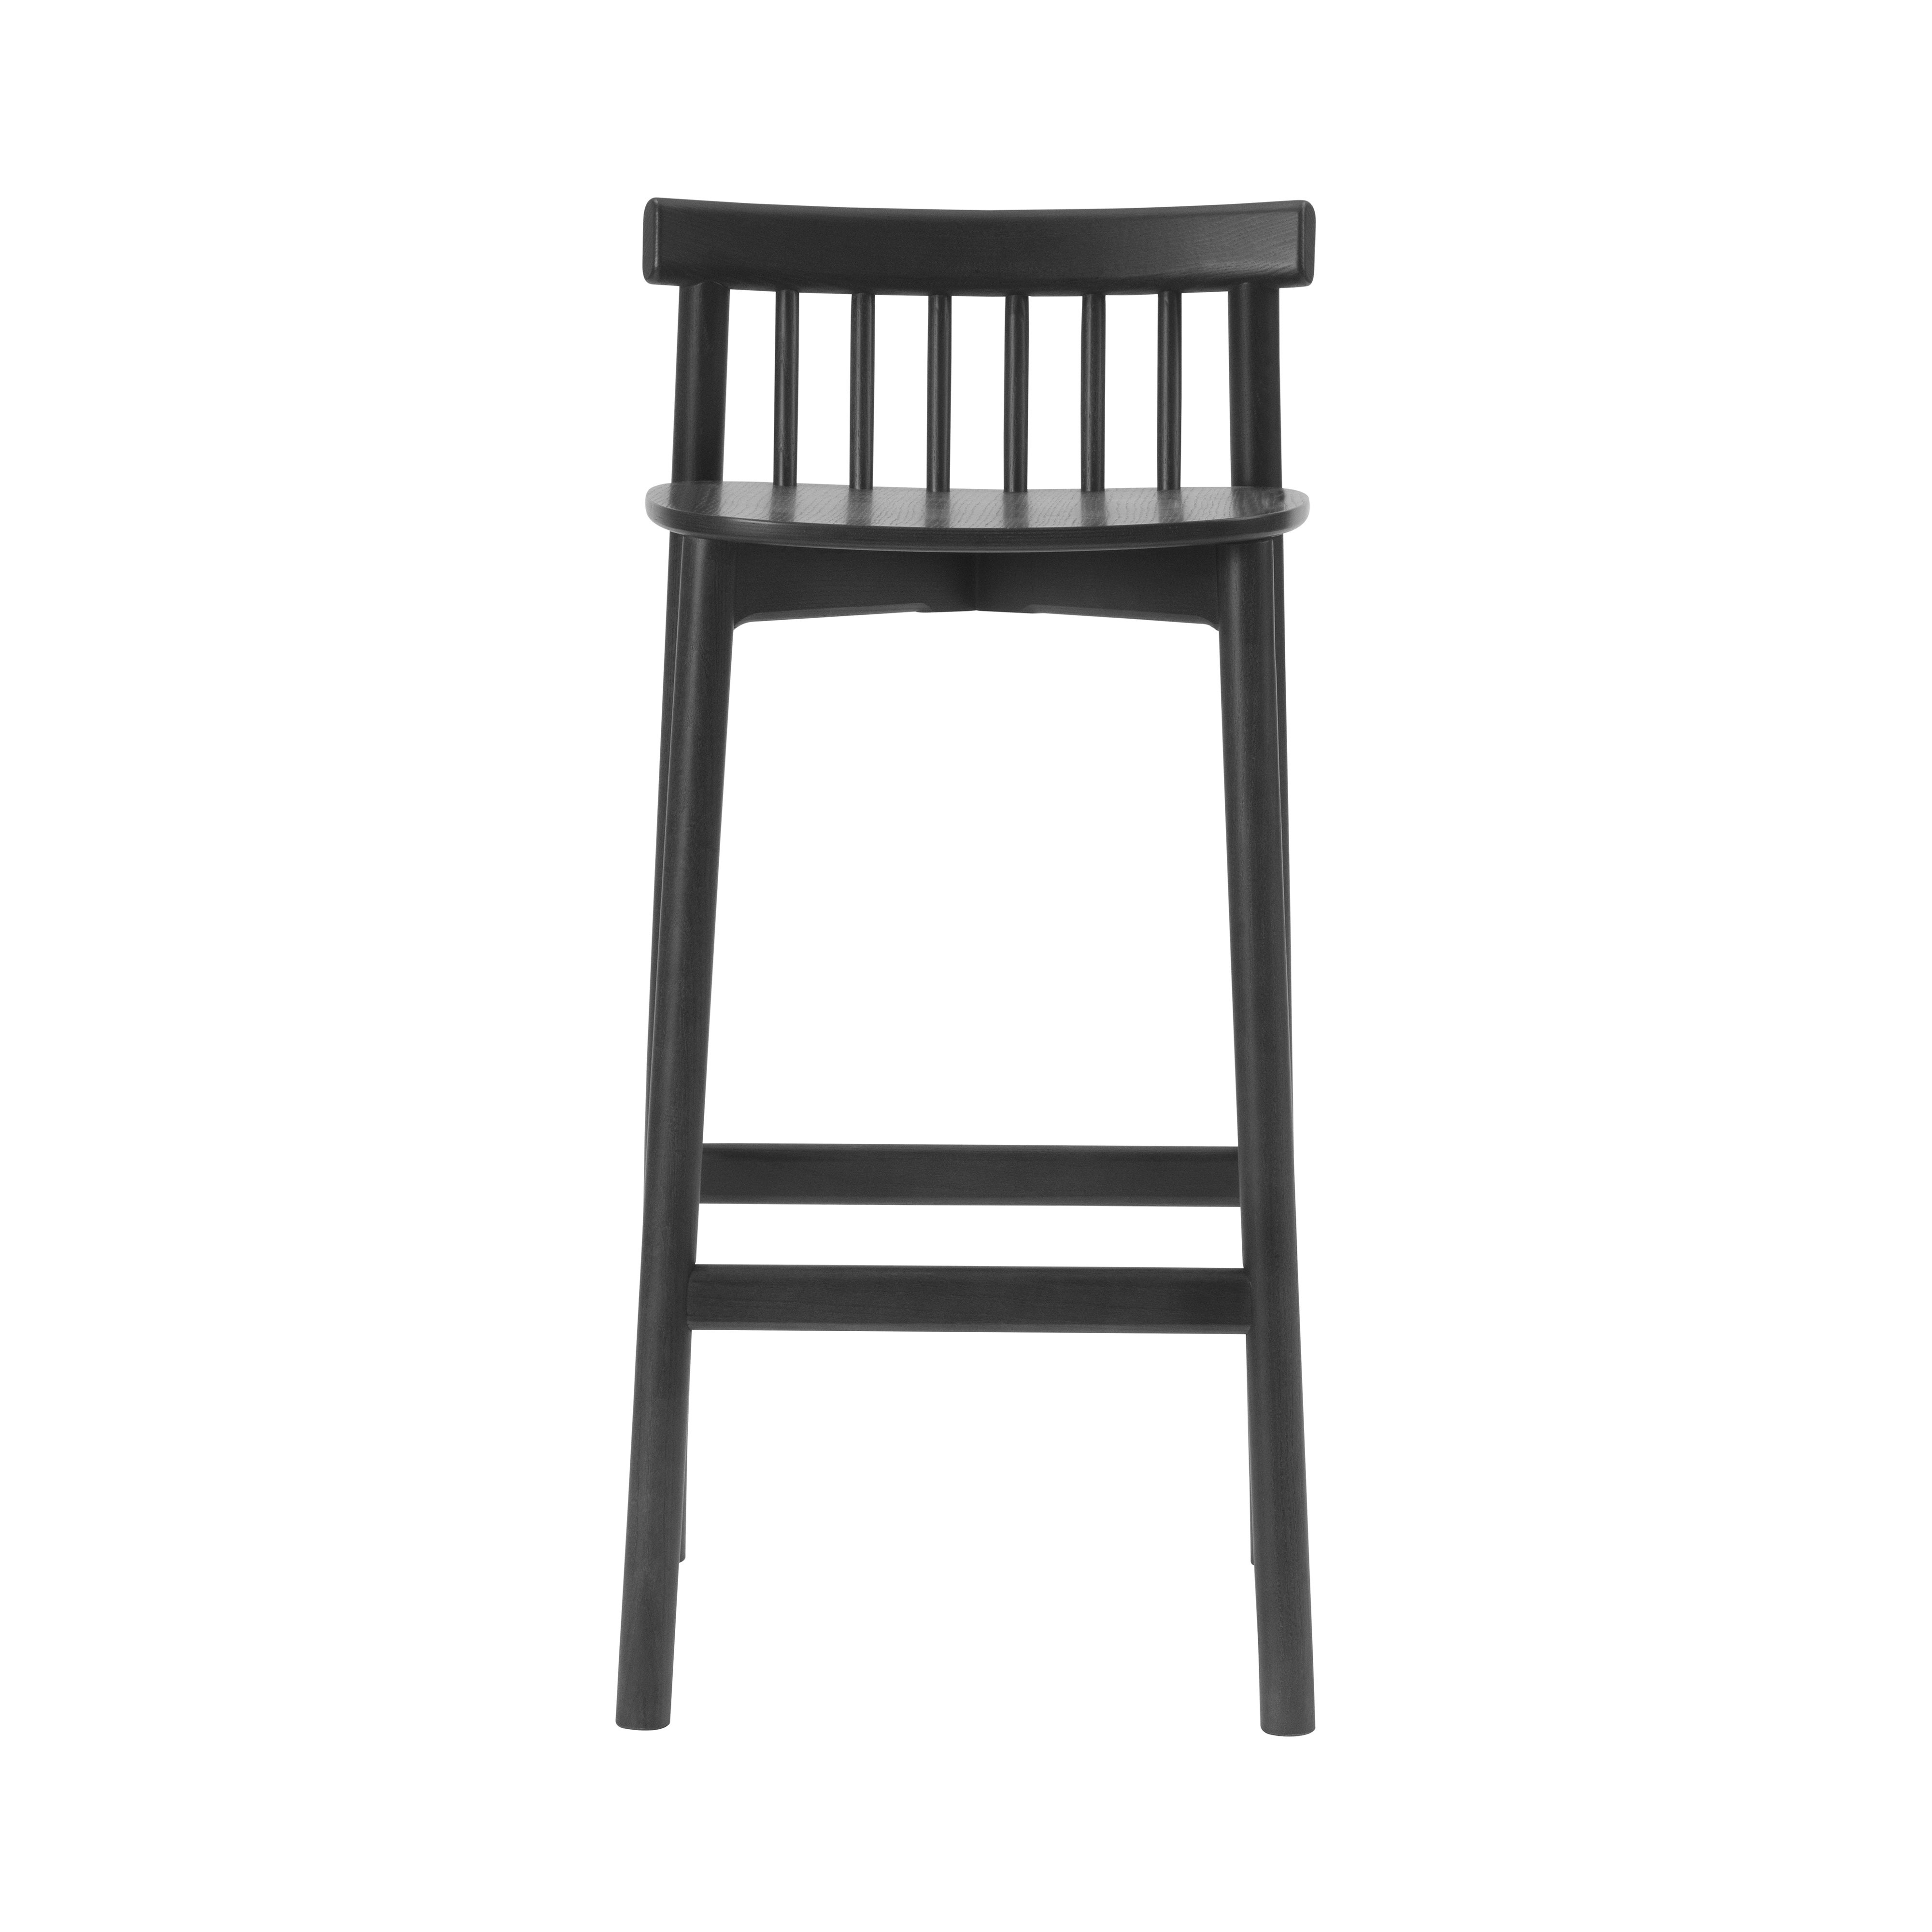 Pind Bar + Counter Stool: Bar + Black Stained Ash